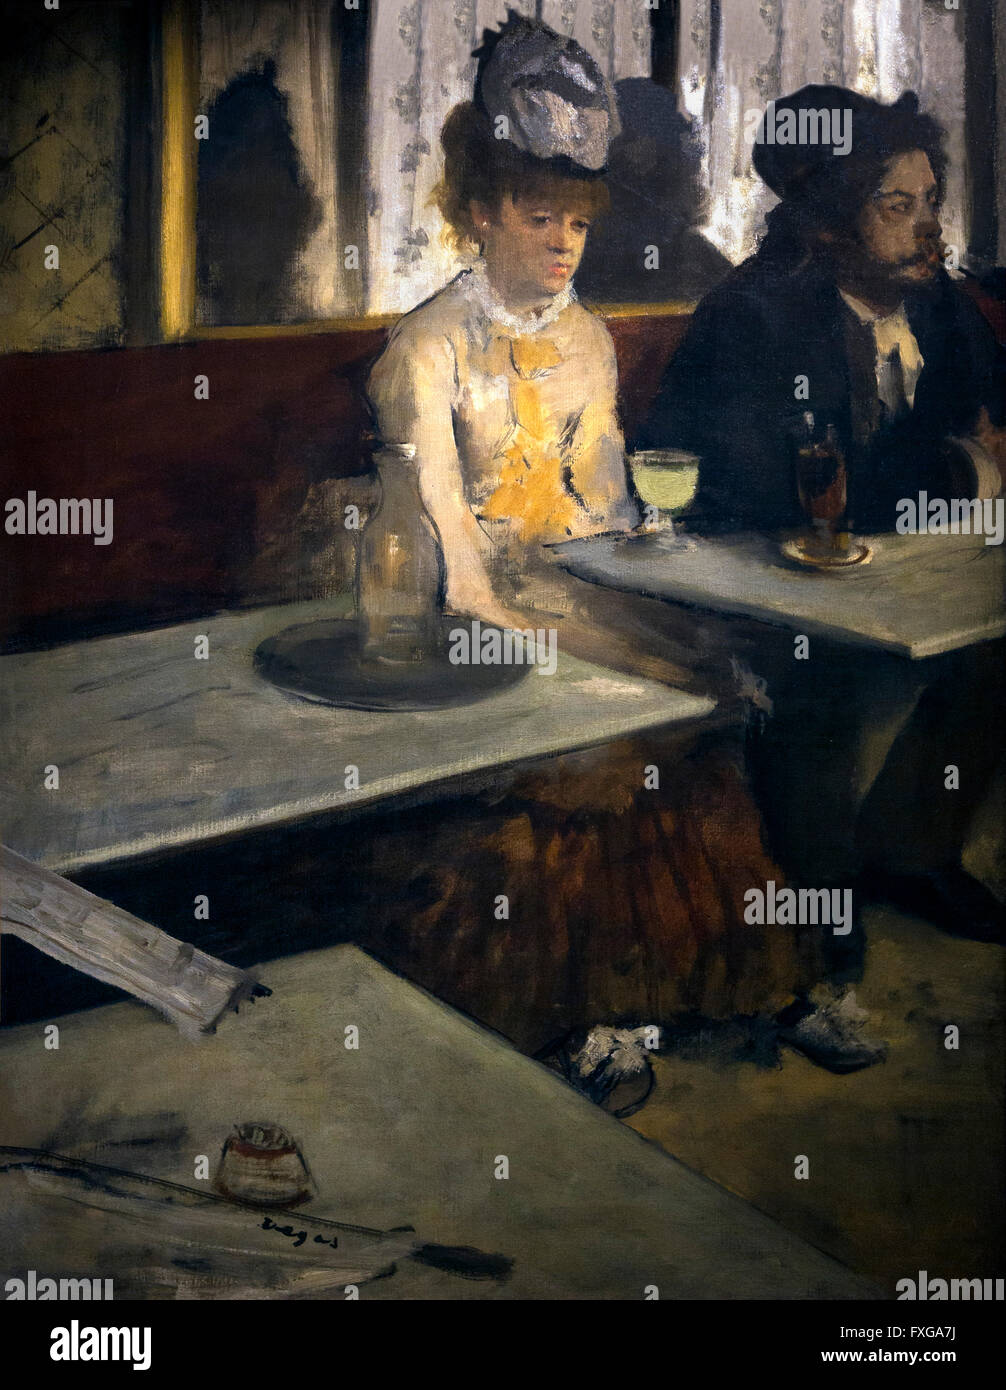 In a Cafe, Absinthe, Dans un cafe,  l'Absinthe, by Edgar Degas, 1873,  Musee D'Orsay Art Gallery, Paris, France, Europe Stock Photo